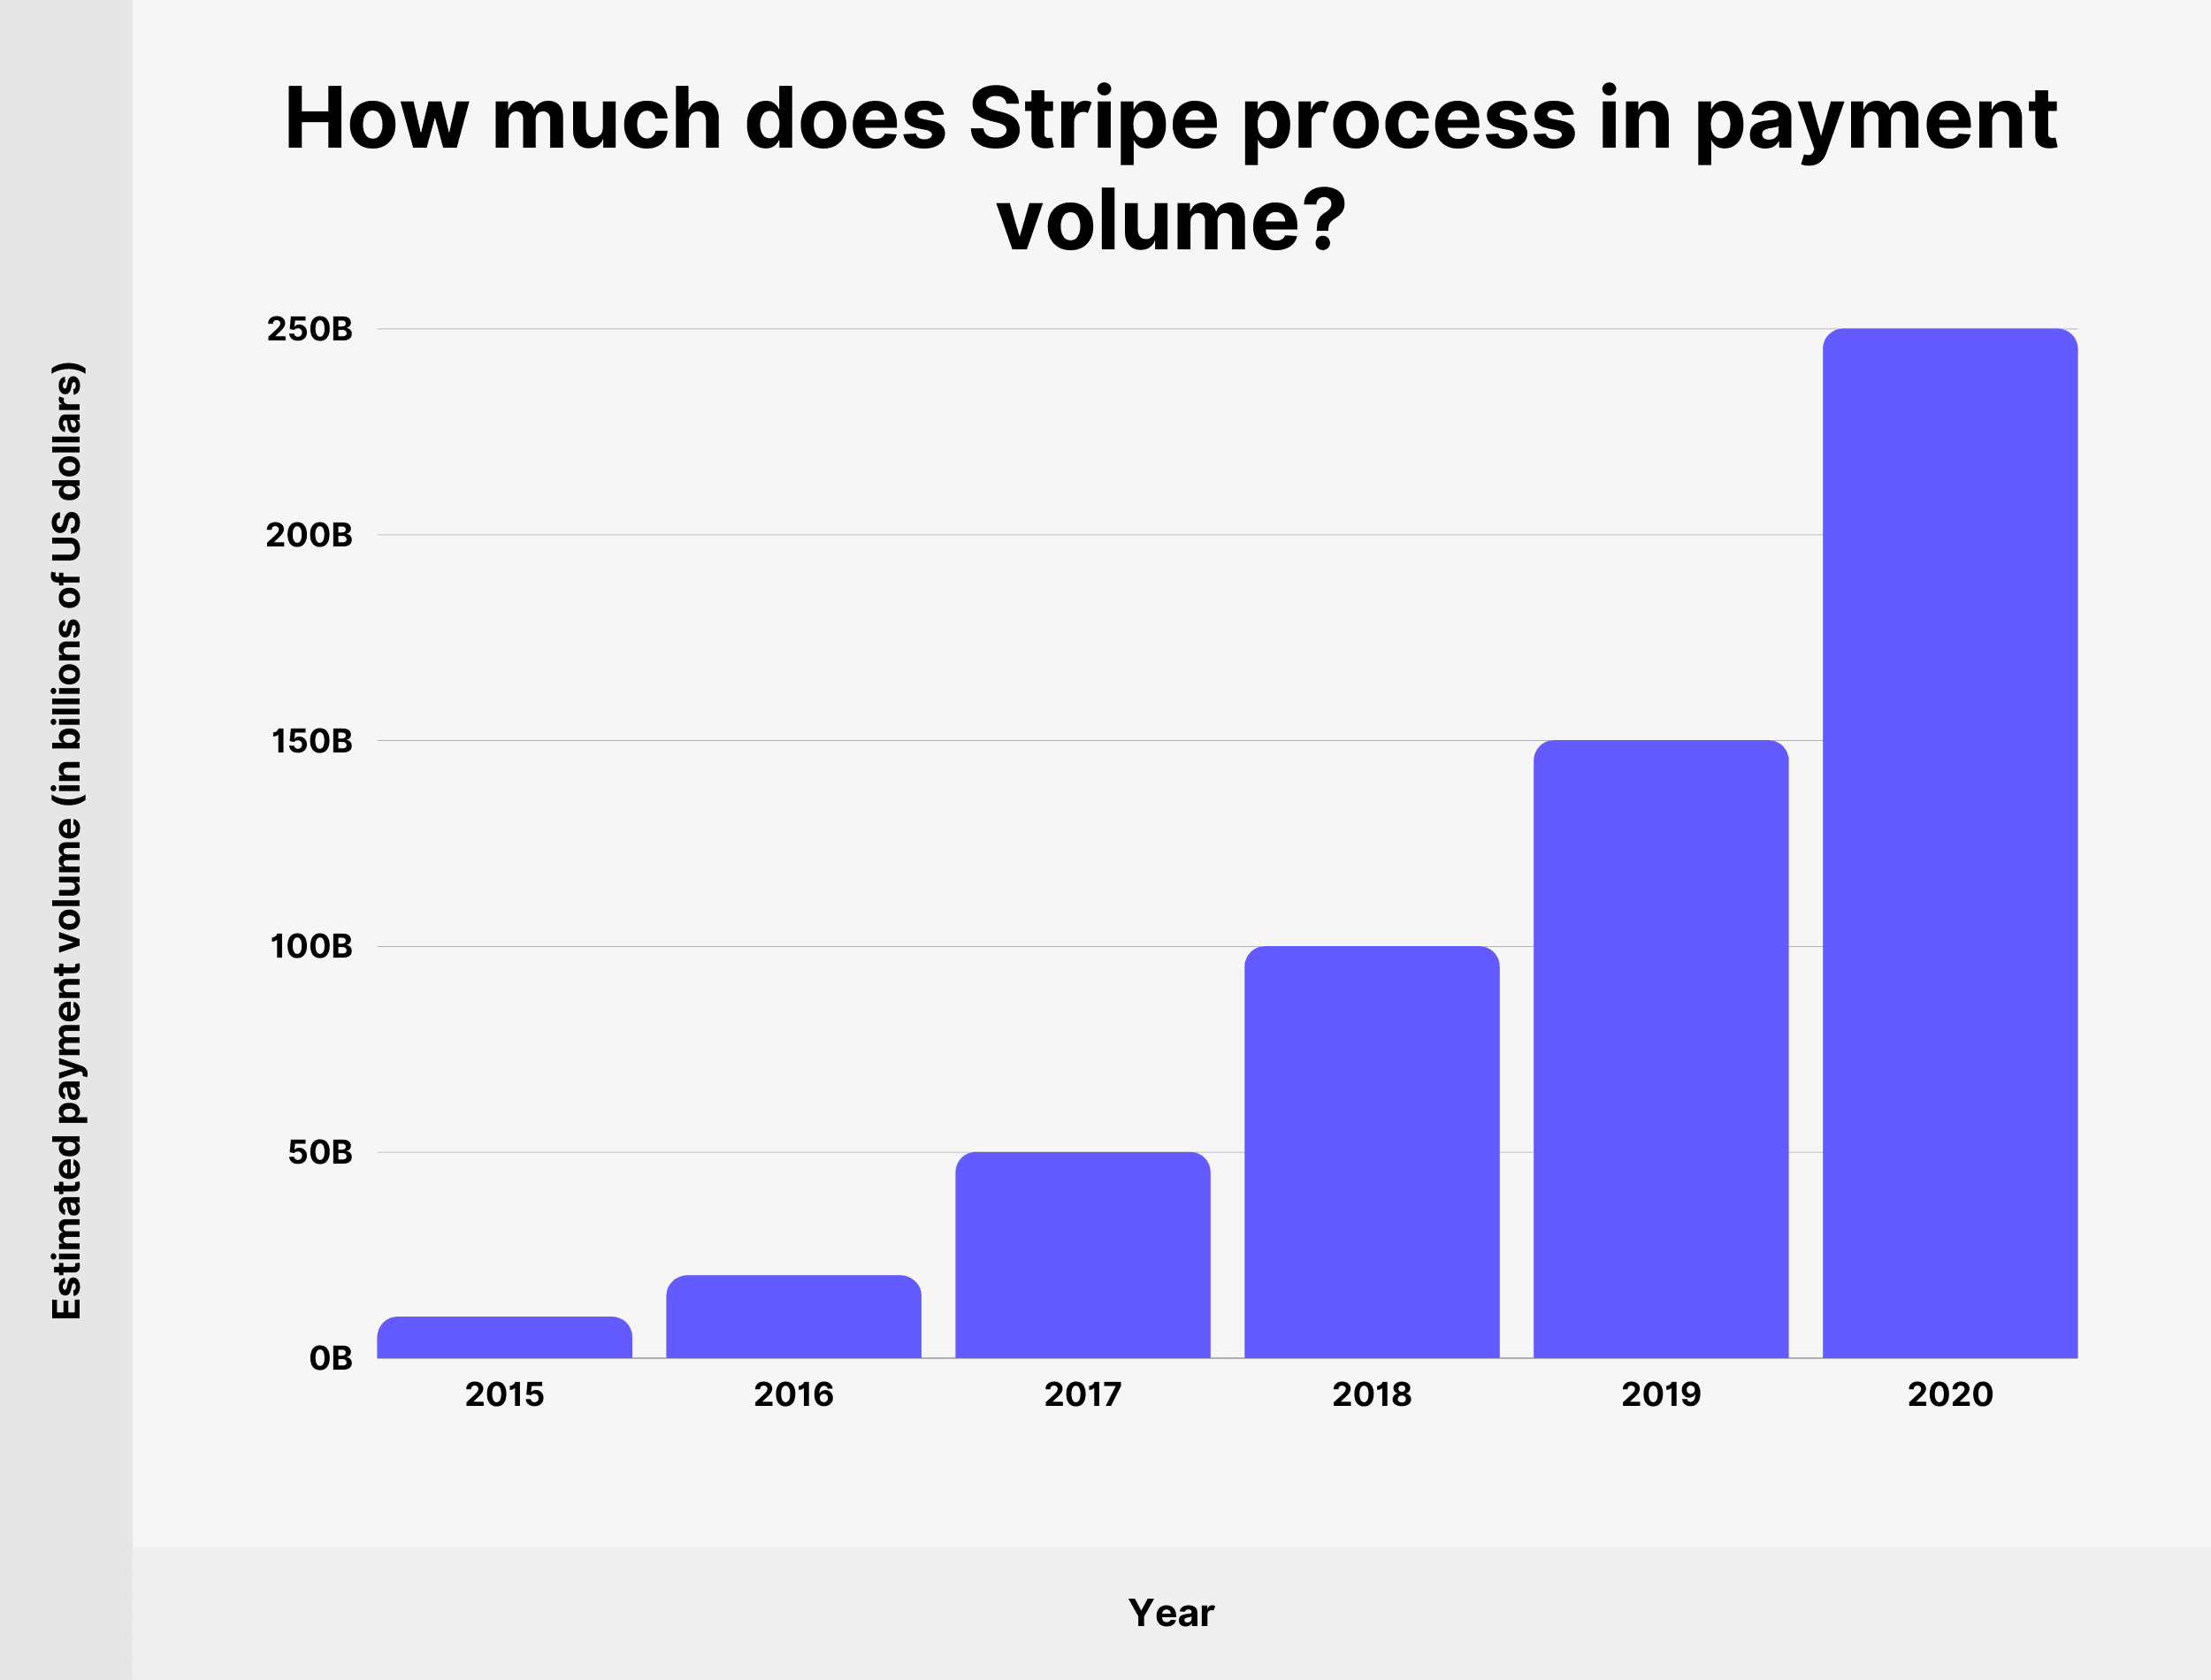 How much does Stripe process in payment volume?